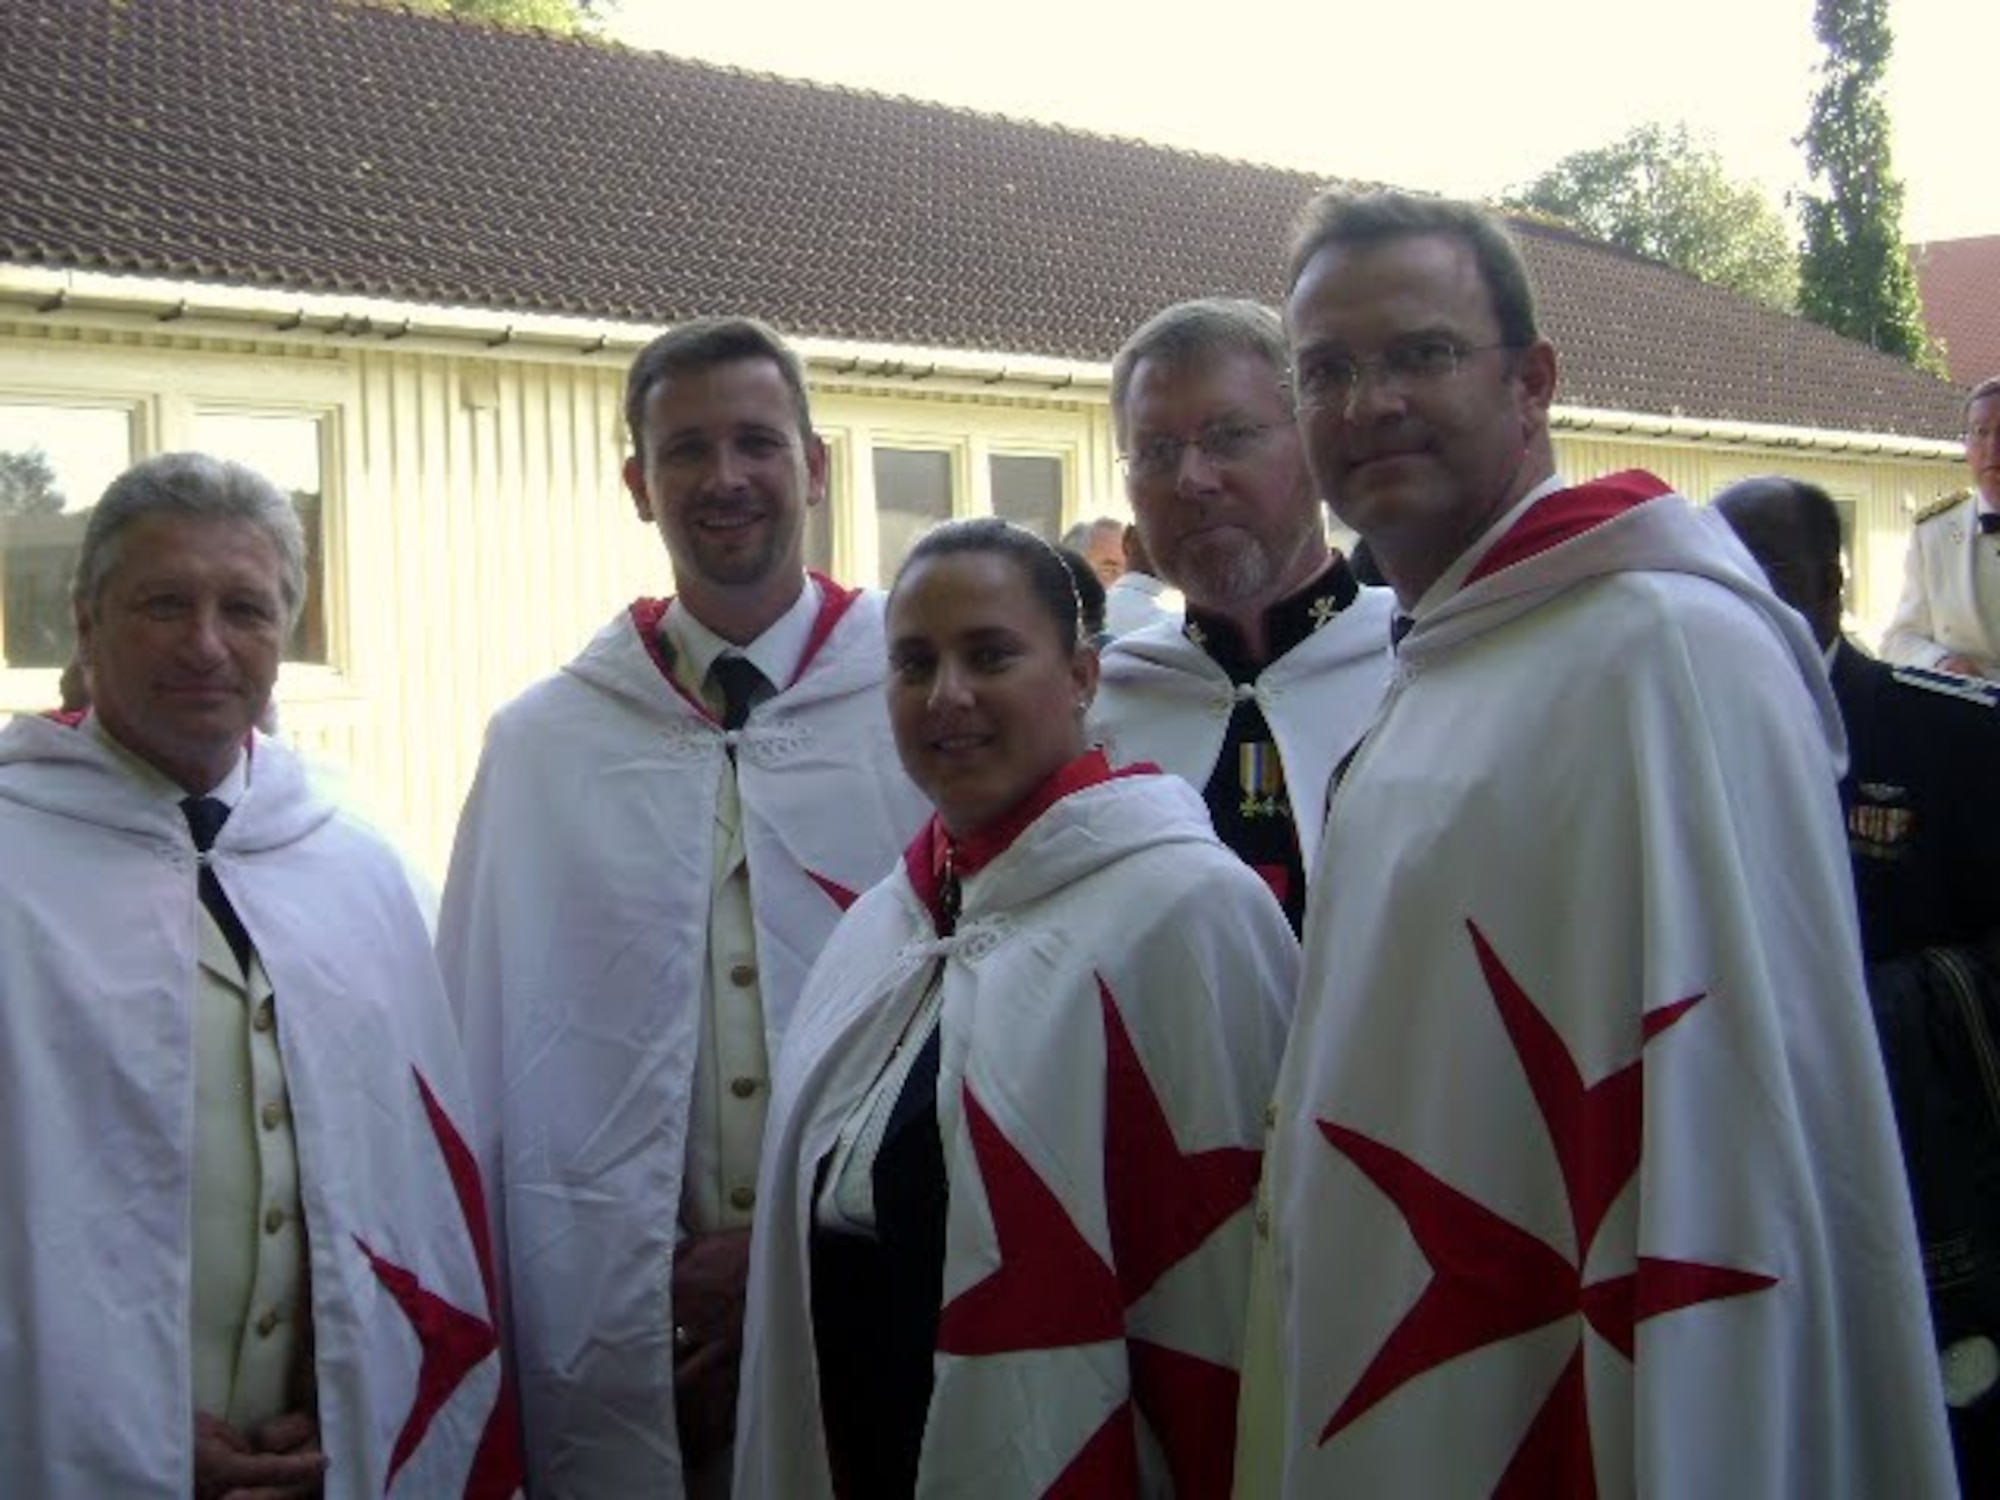 Dame Zohe Quintero (middle), a captain with the 920th Force Support Squadron, poses for a photo with members who were knighted by the Sovereign Military Order of the Temple of Jerusalem. (Courtesy photo) 